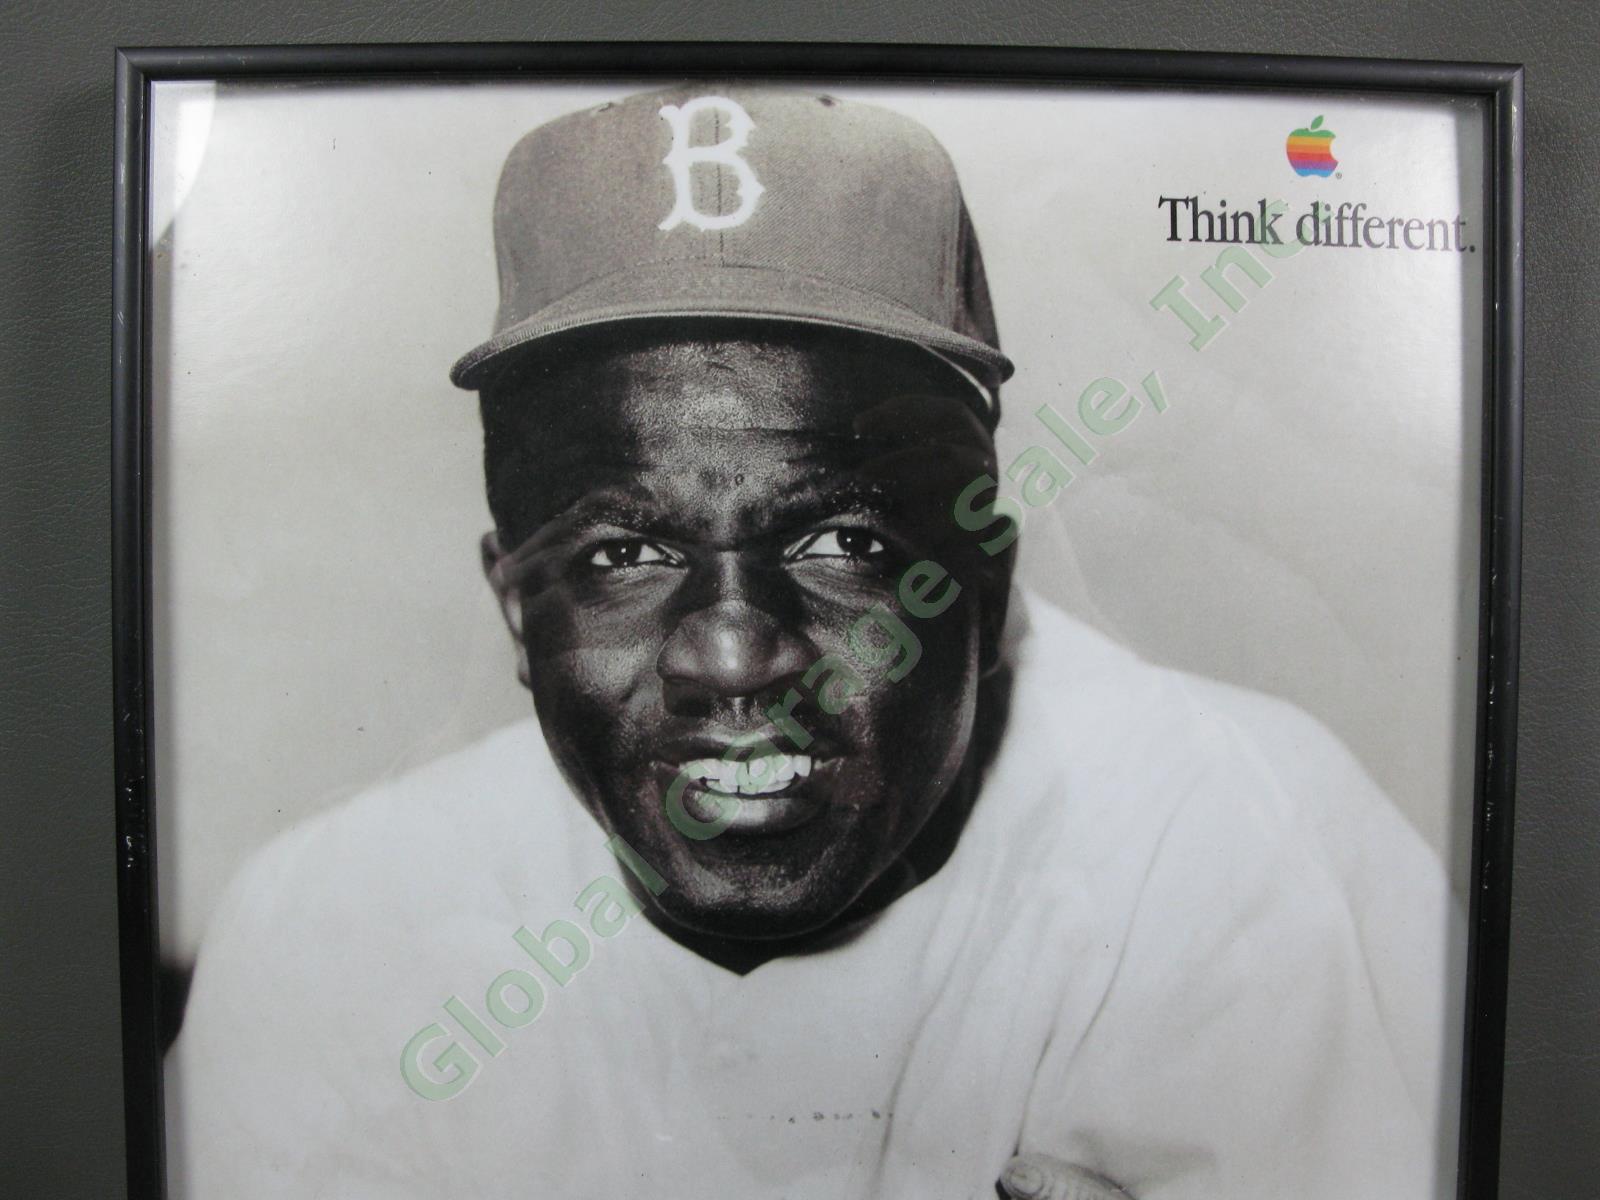 RARE Jackie Robinson 42 Apple Think Different Poster MLB BLM Civil Rights 12x17 1